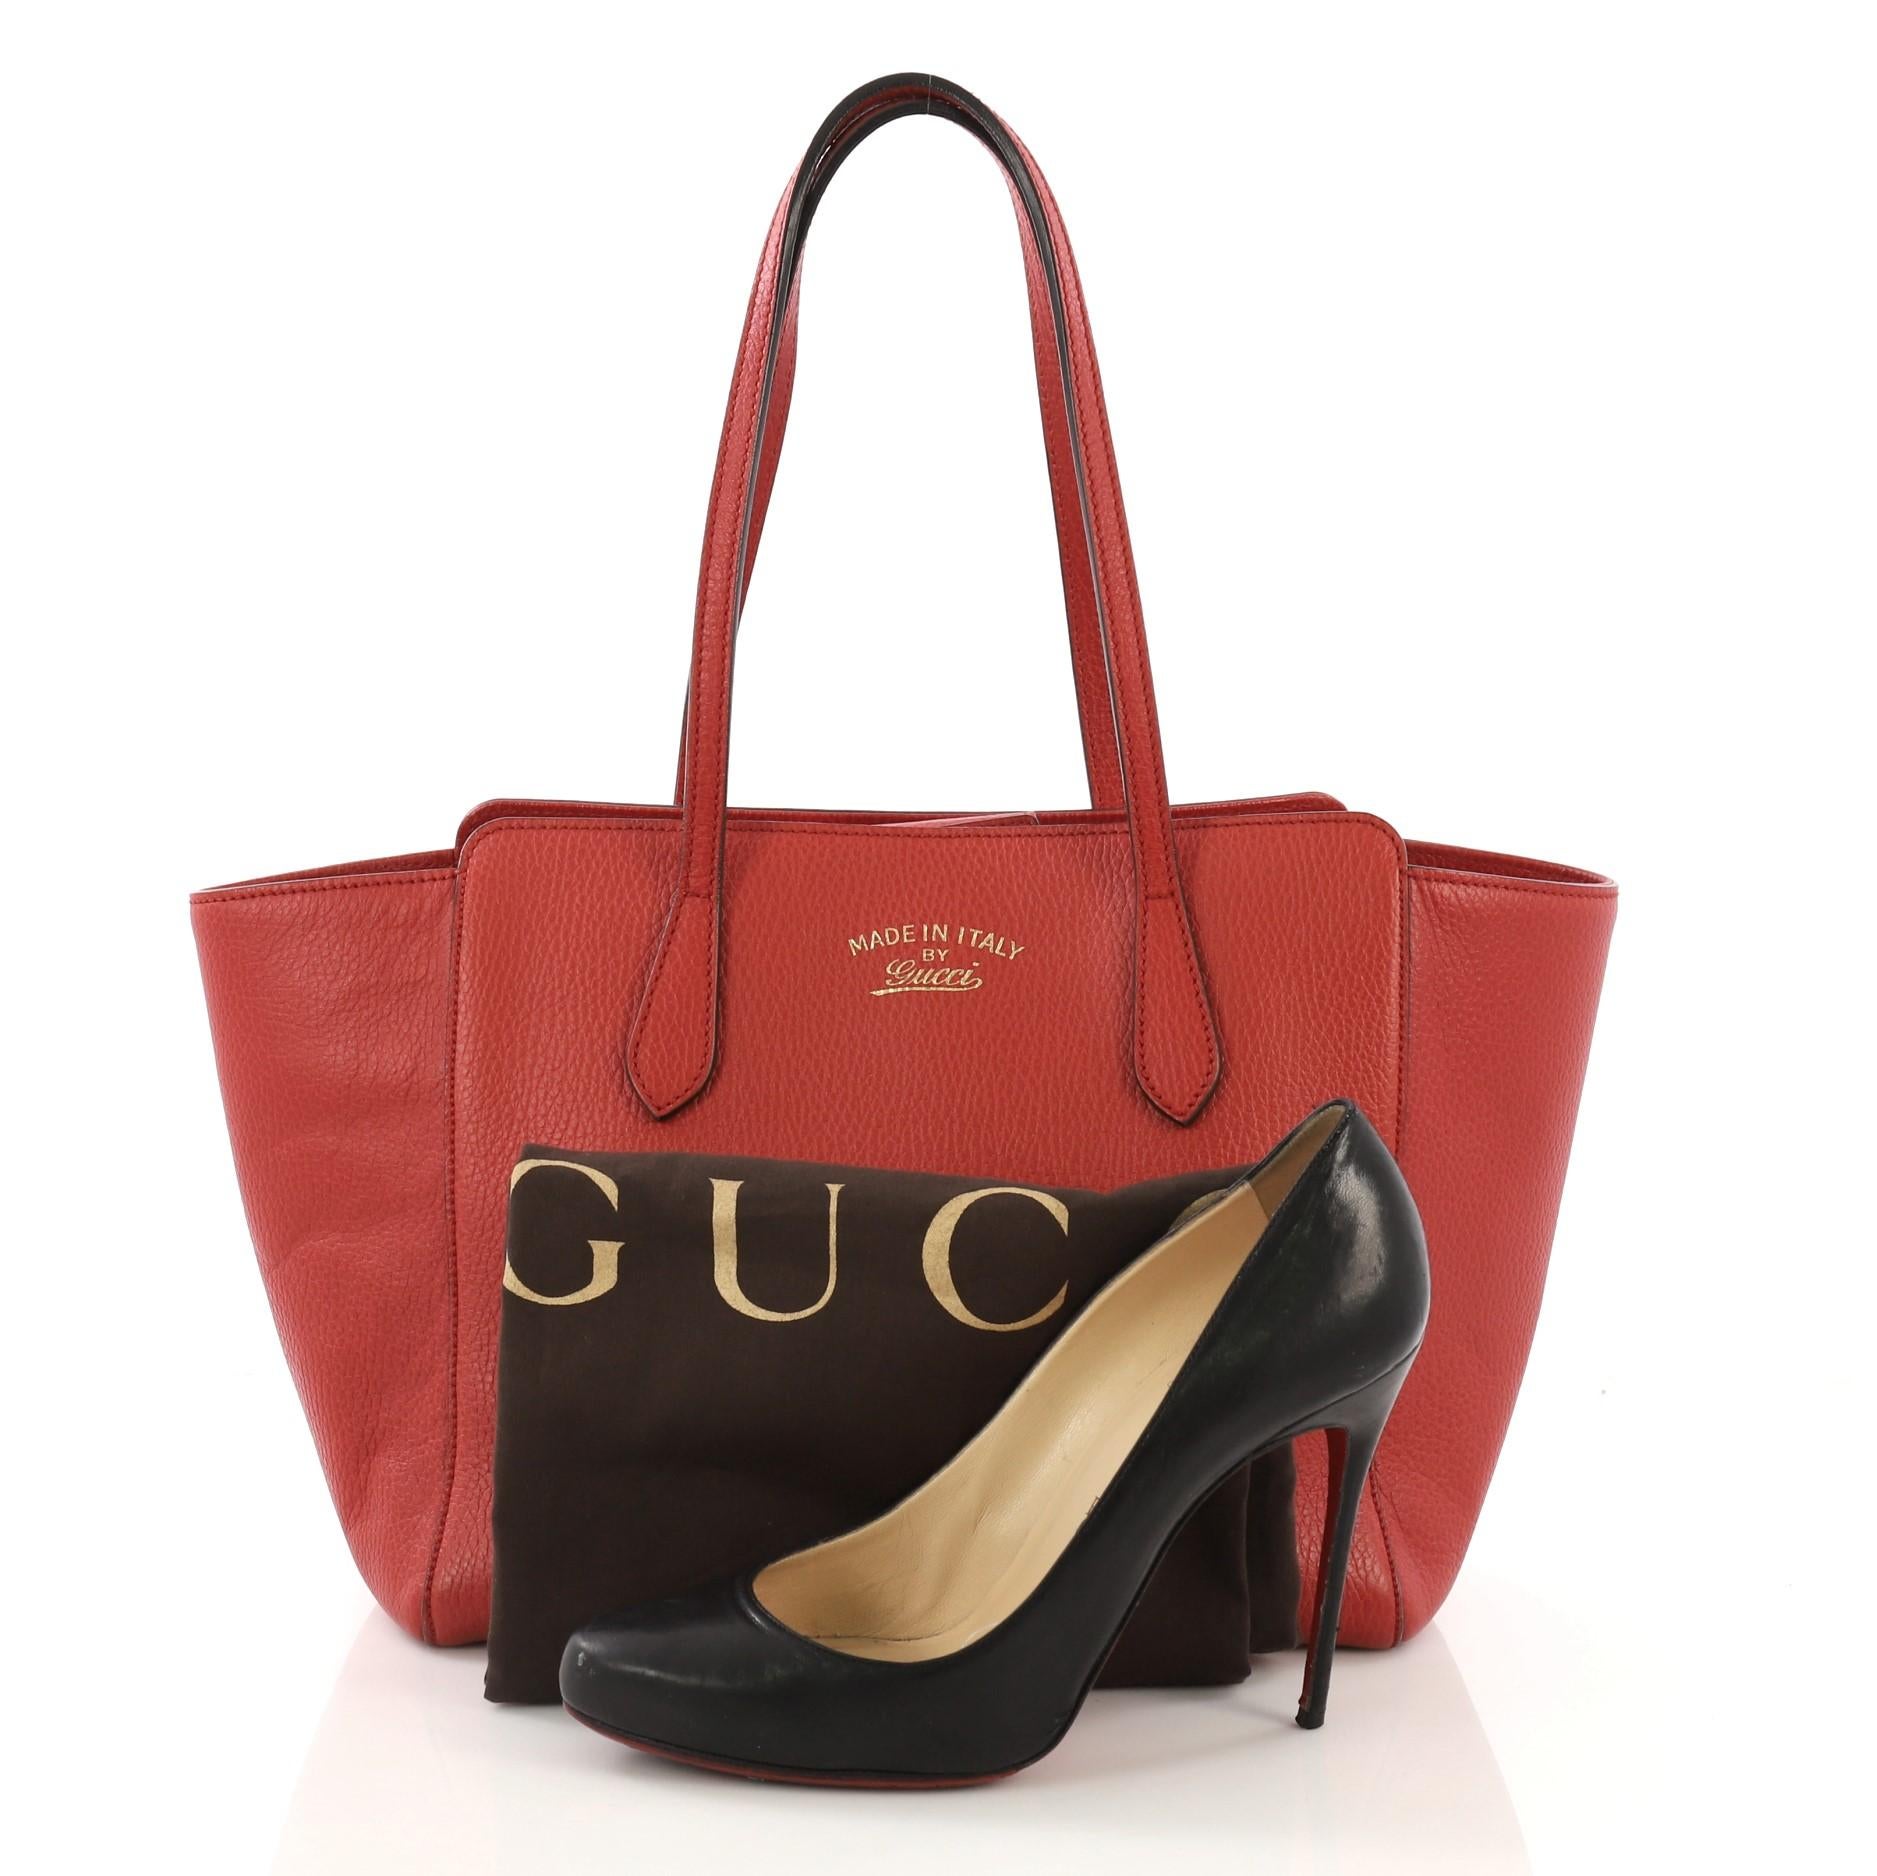 This Gucci Swing Tote Leather Small, crafted in red leather, features dual slim handles, Gucci stamped logo at the front, expanded wing silhouette, and gold-tone hardware. Its hidden magnetic snap closure opens to a beige fabric interior with slip